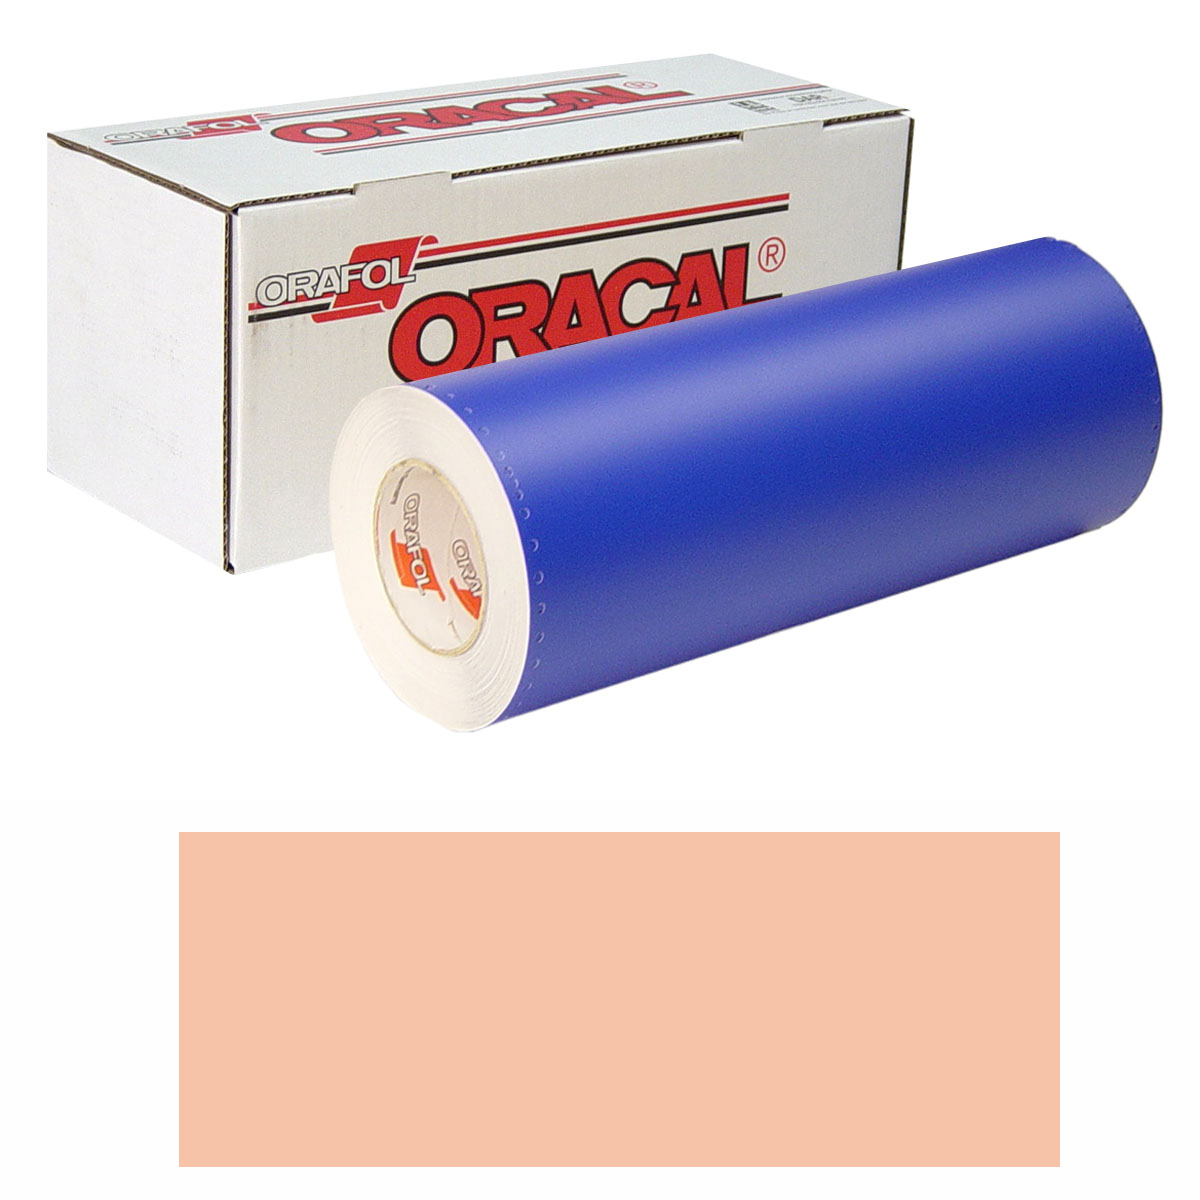 ORACAL 8300 30in X 50yd 089 Salmon Pink